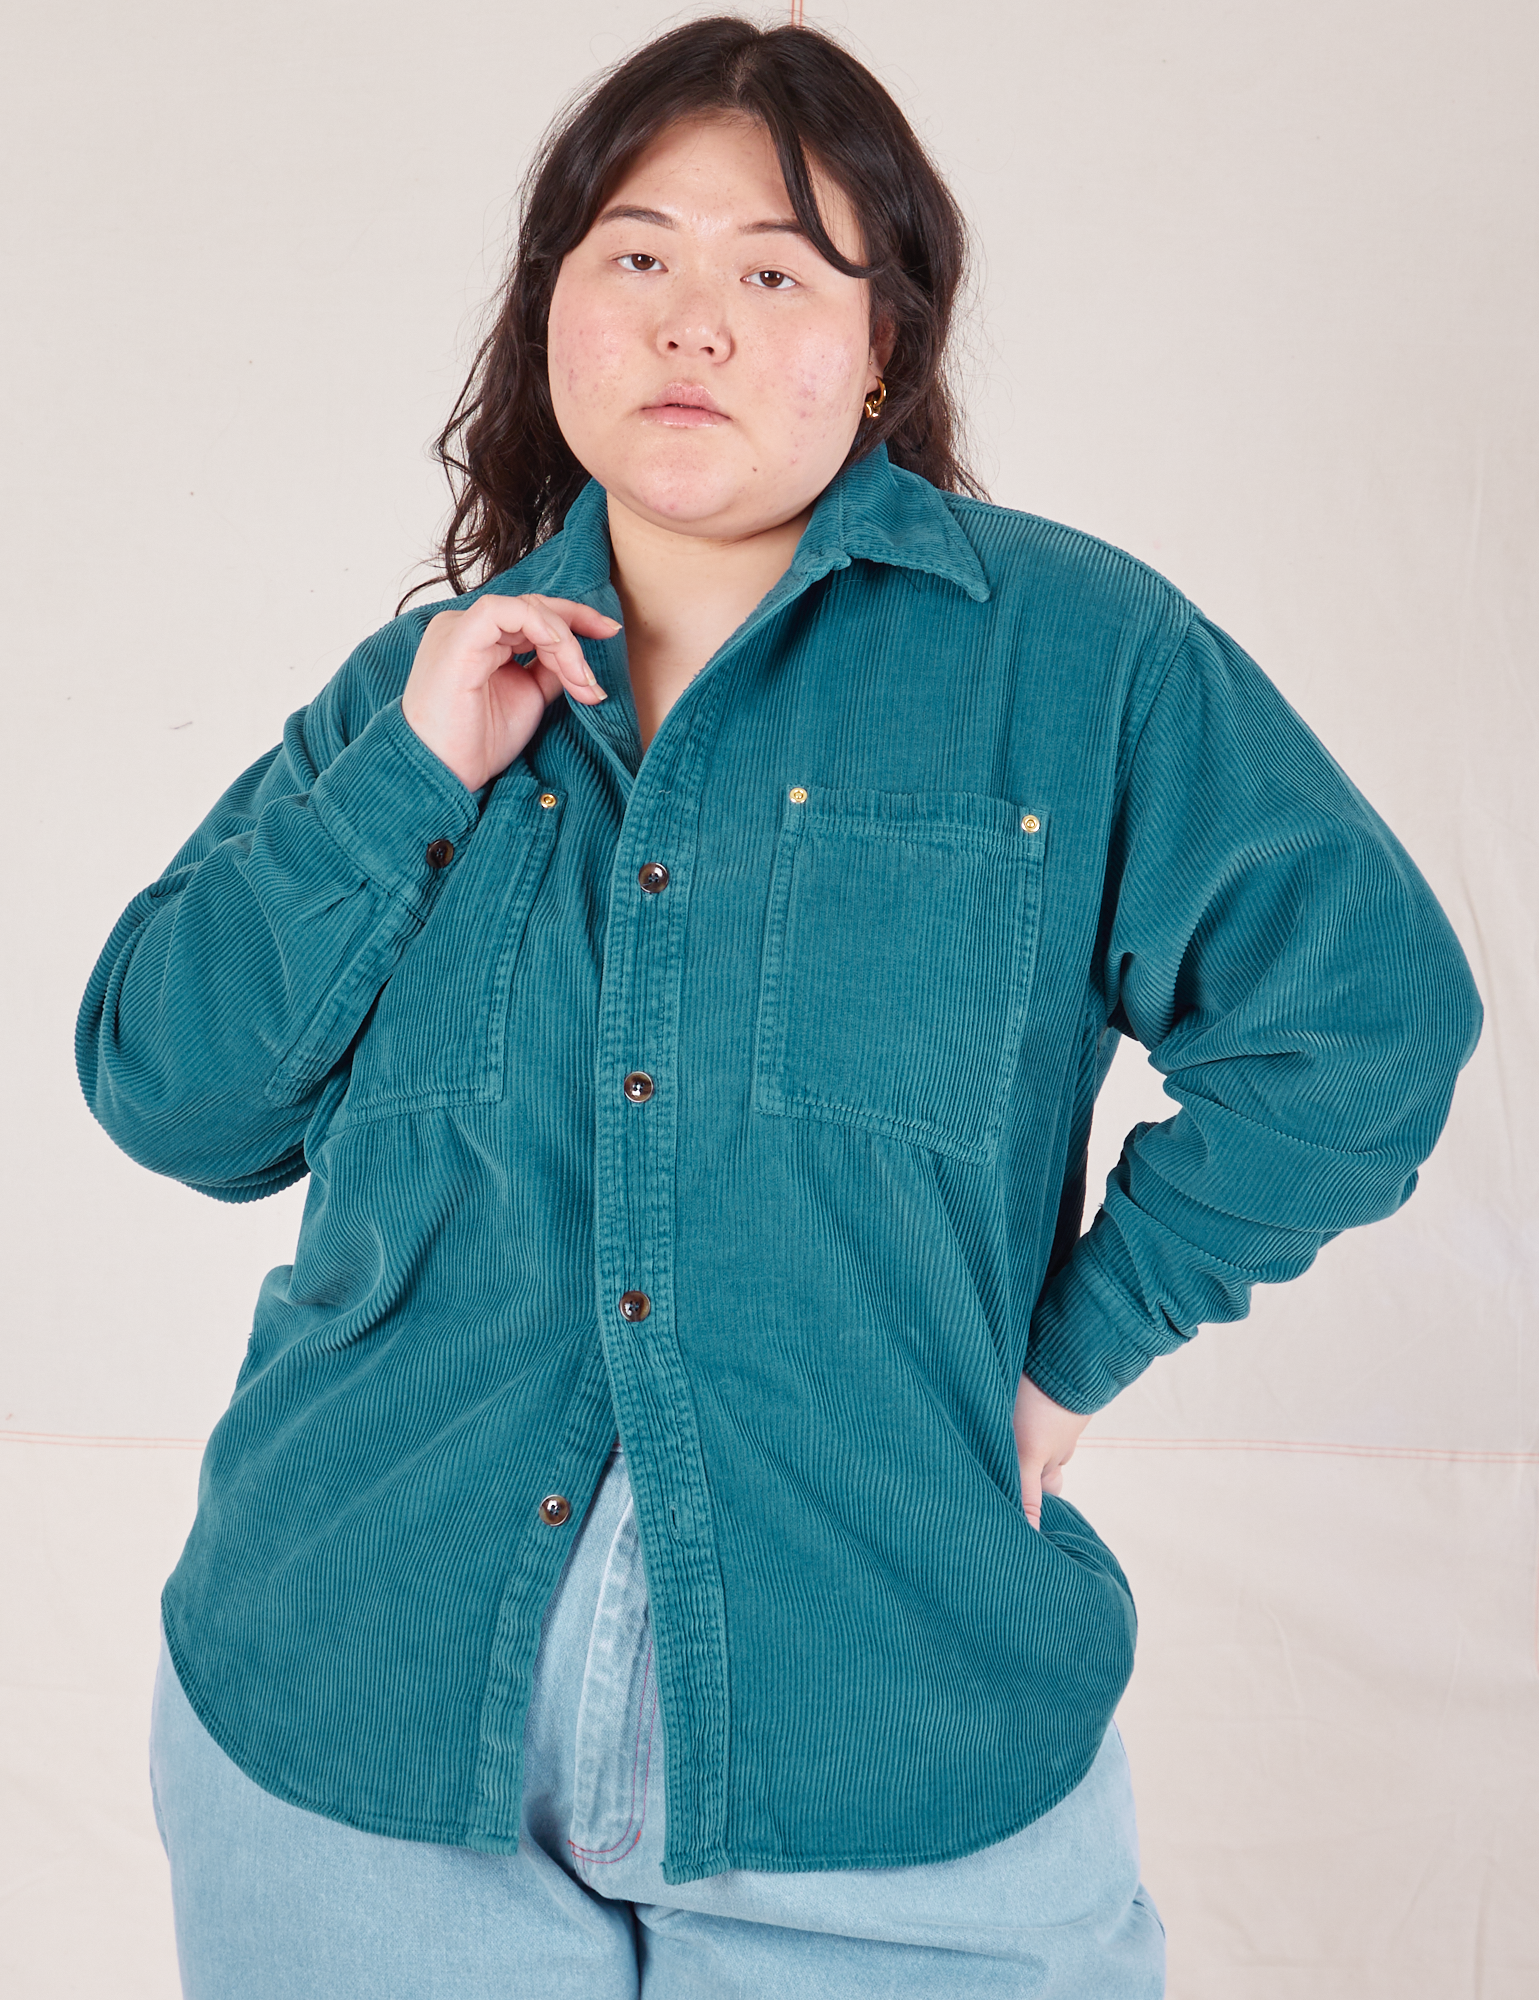 Ashley is 5&#39;7&quot; and wearing M Corduroy Overshirt in Marine Blue